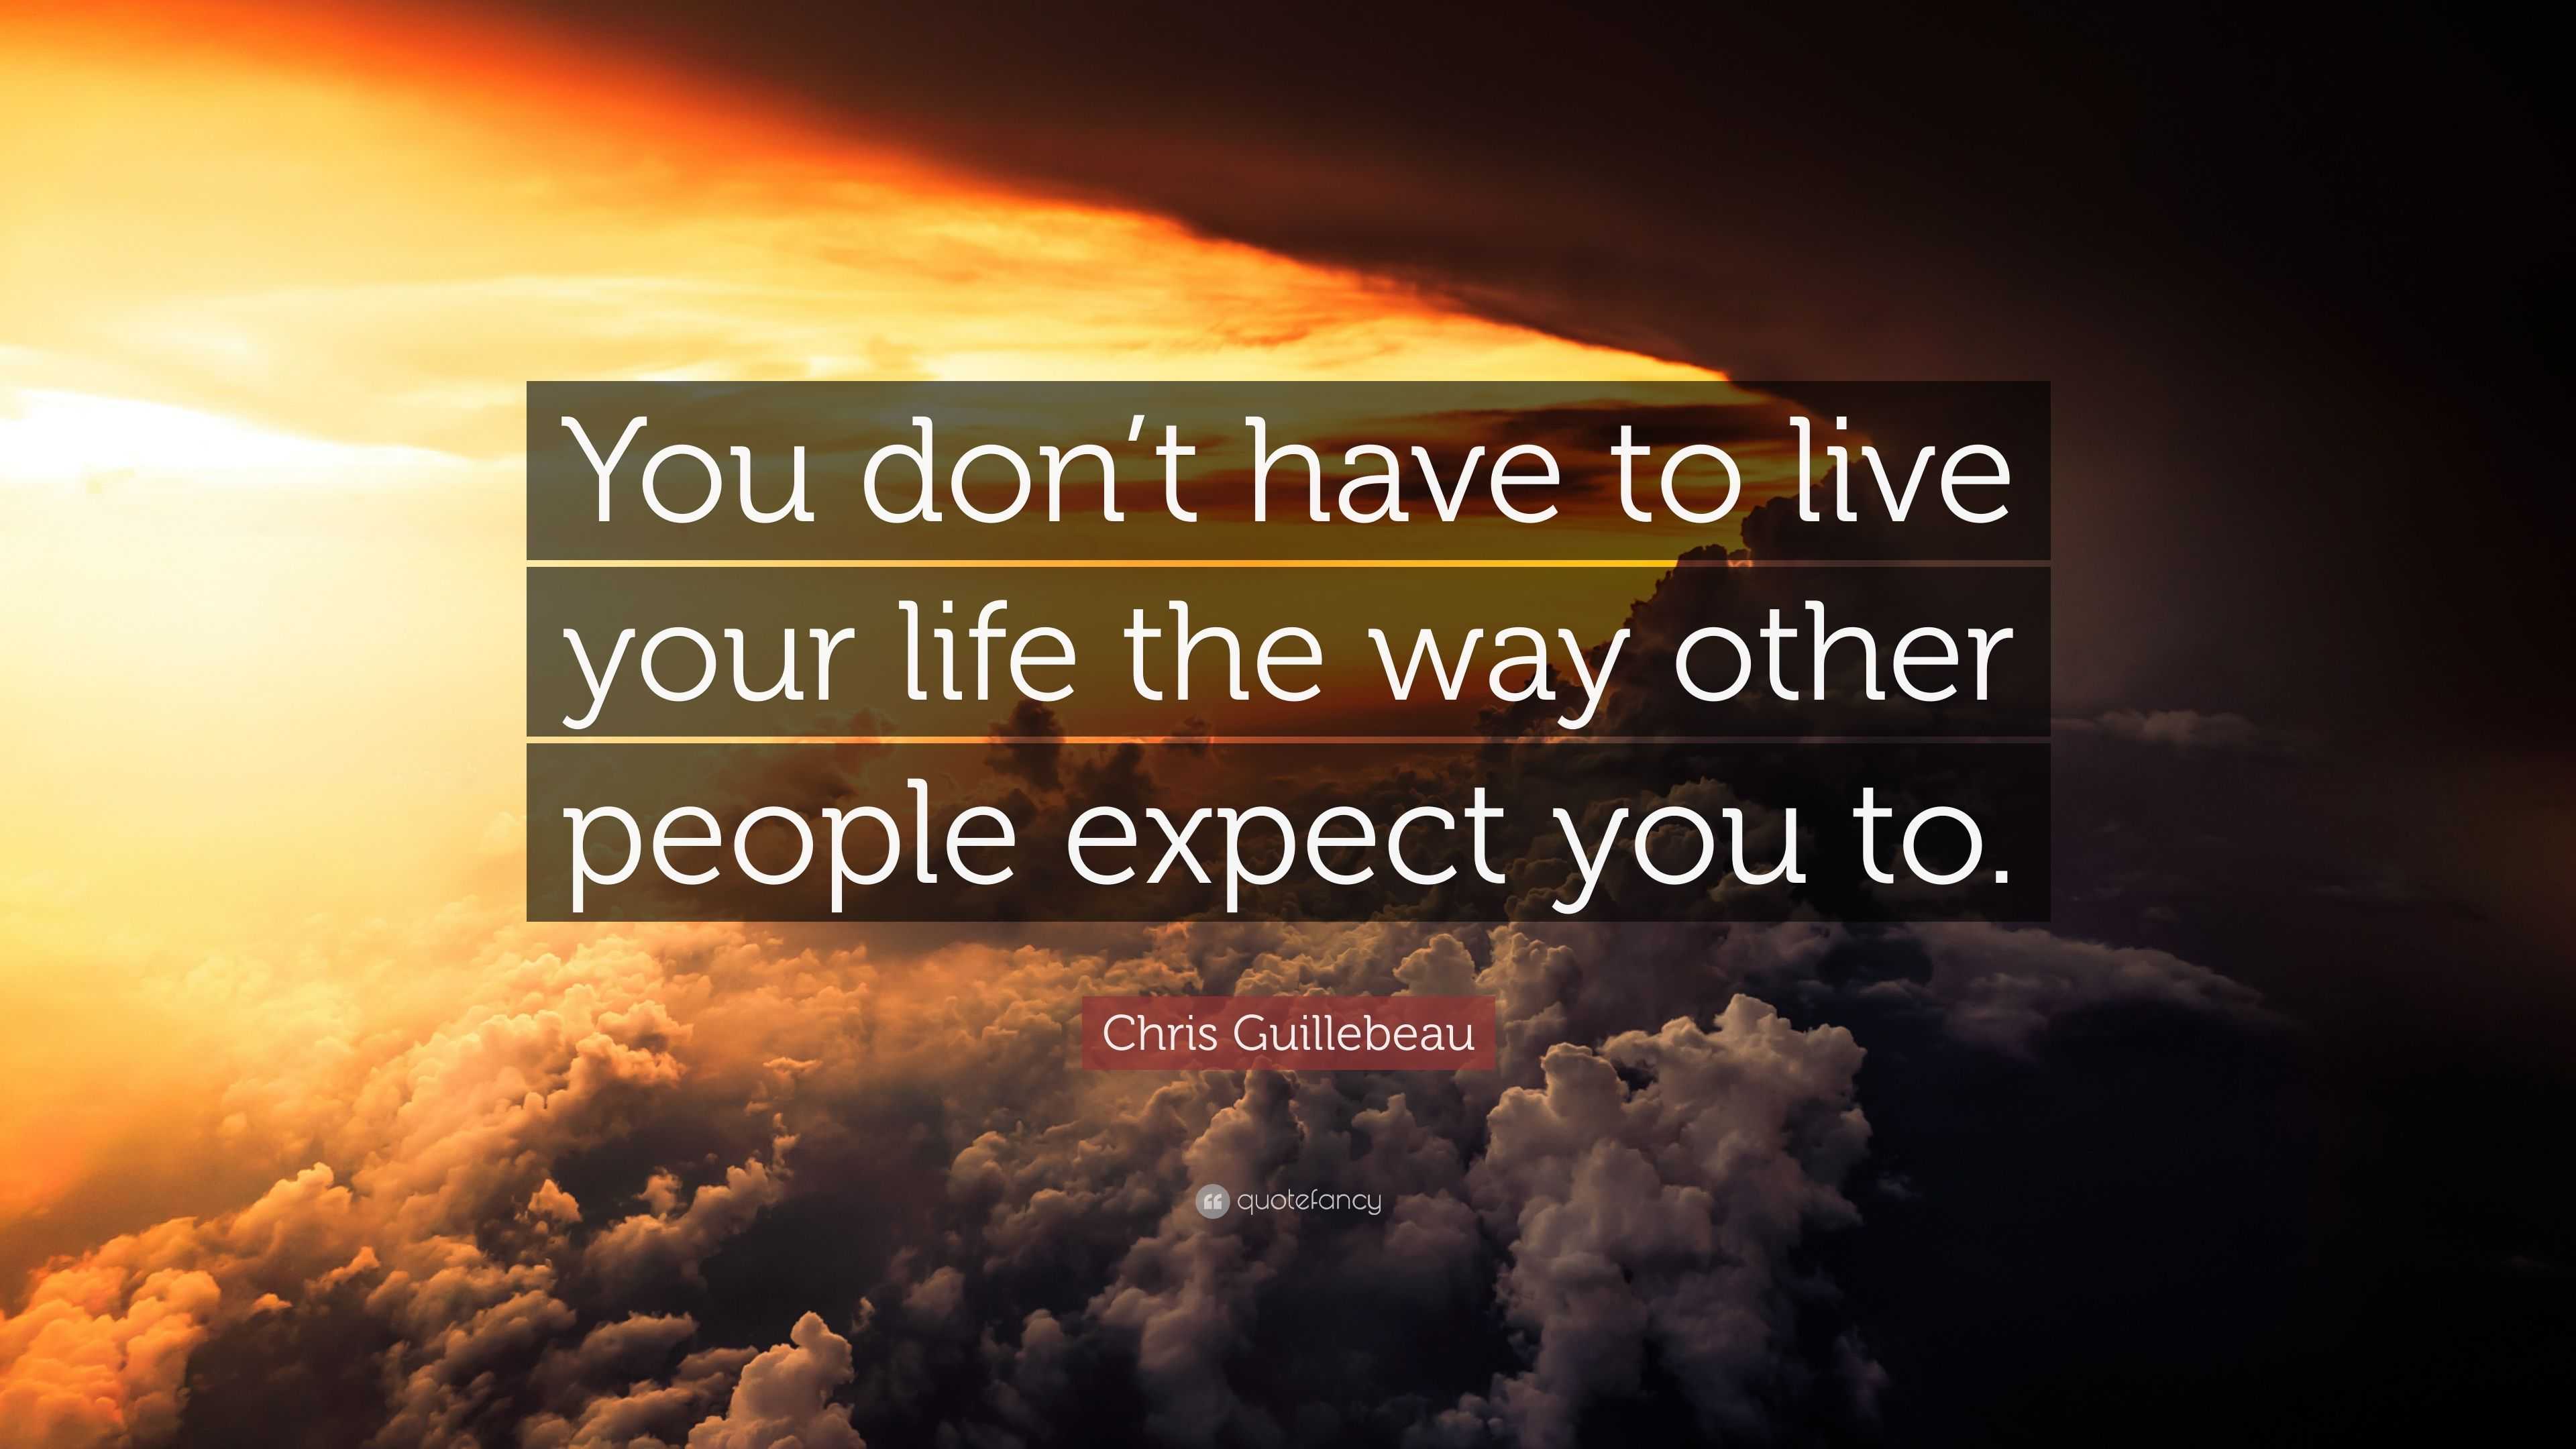 Chris Guillebeau Quote: “You don’t have to live your life the way other ...